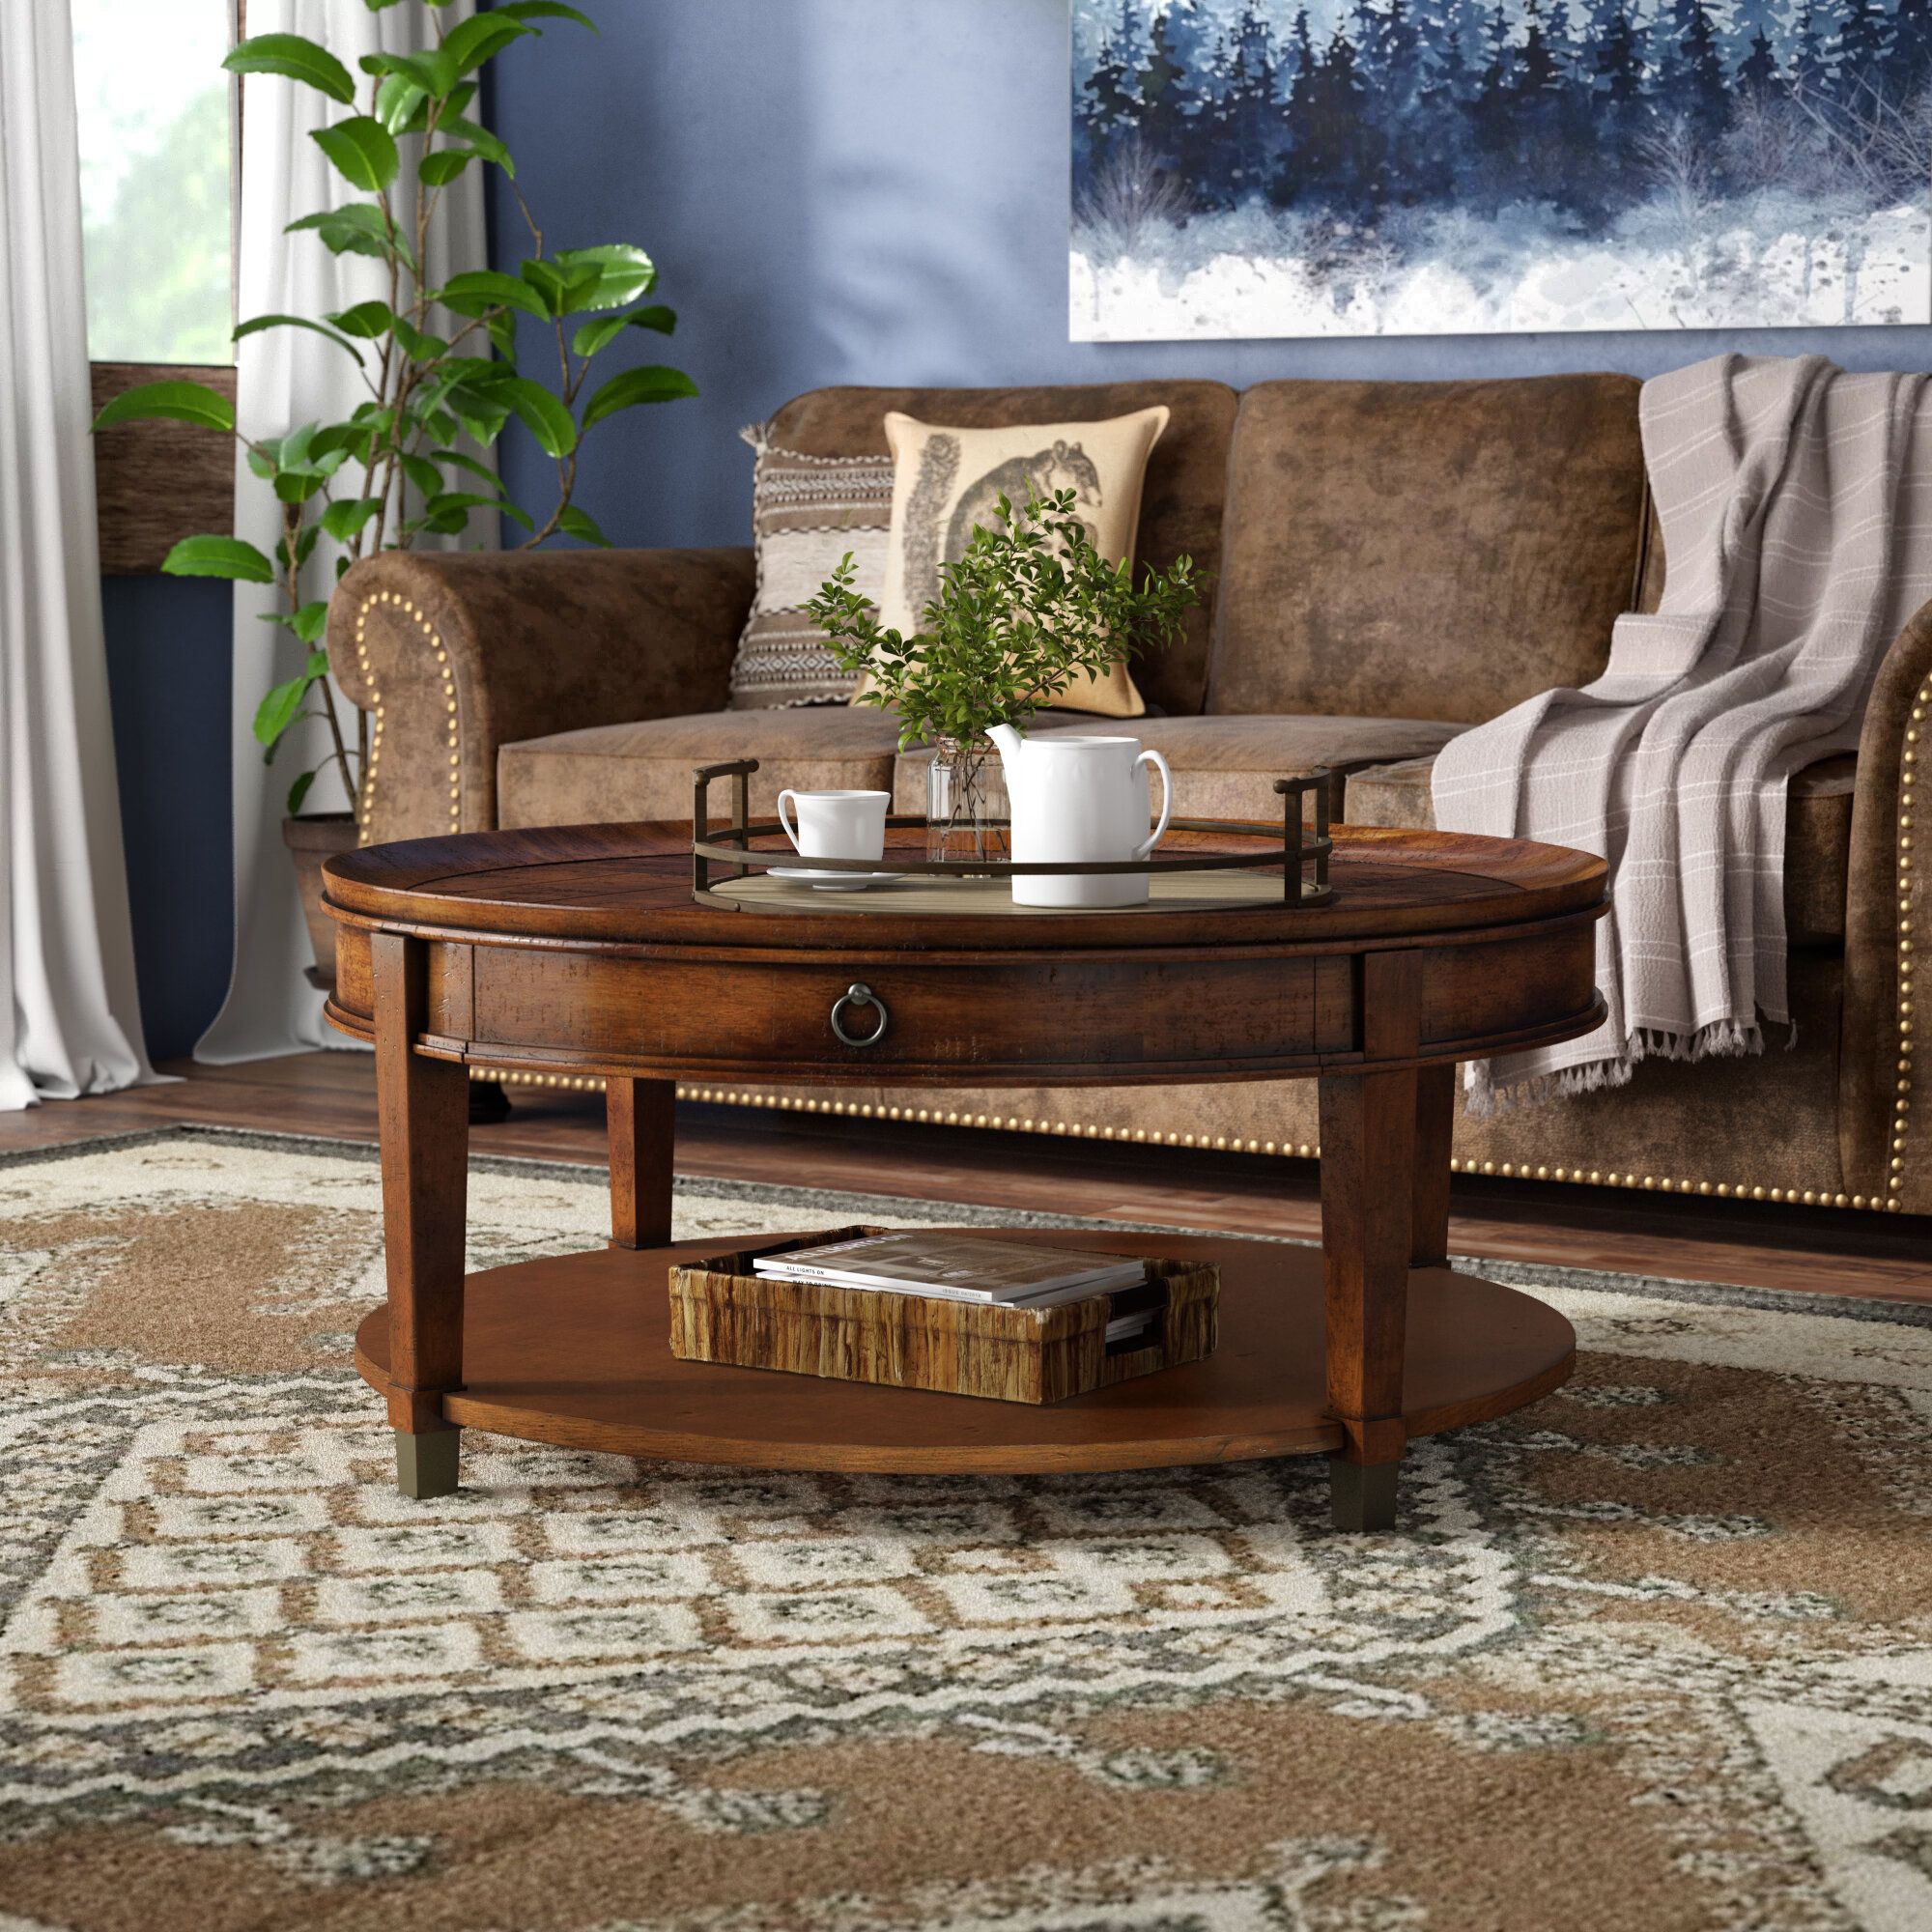 Foundstone™ Shelby 4 Legs Coffee Table With Storage & Reviews | Wayfair Intended For Mahogany Coffee Tables (View 20 of 20)